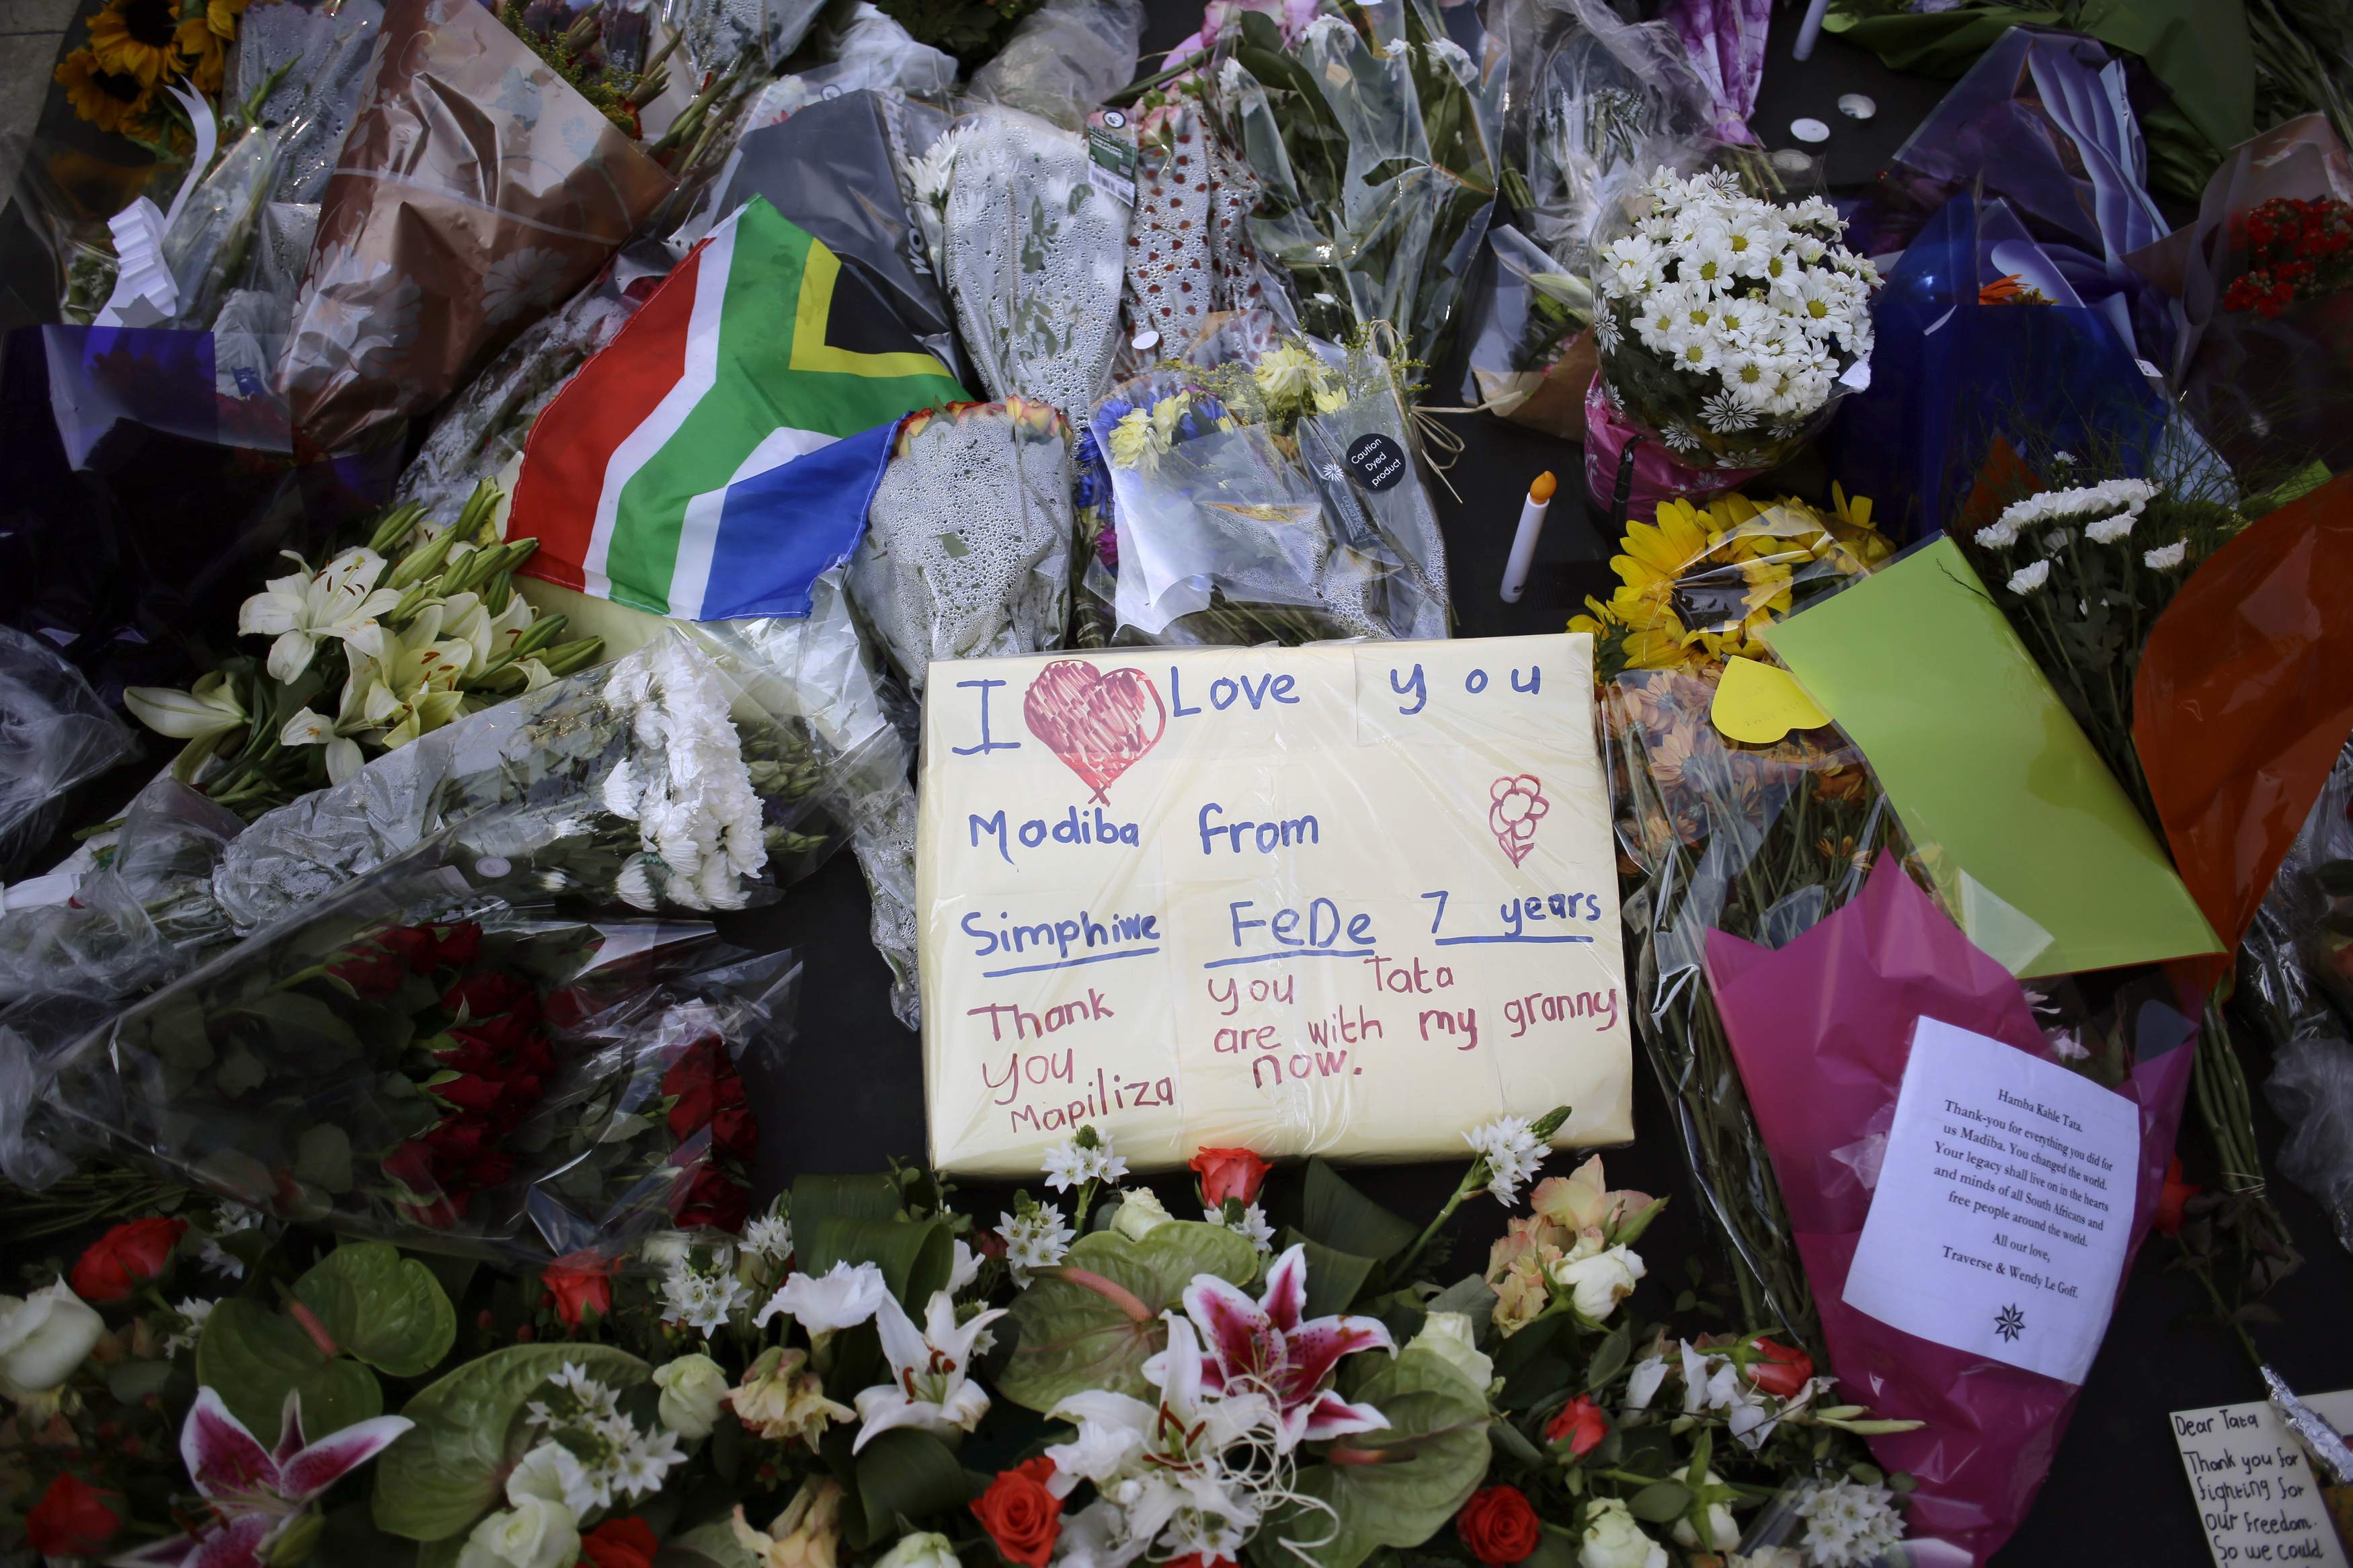 Flowers and written tributes are seen at Mandela square in Johannesburg